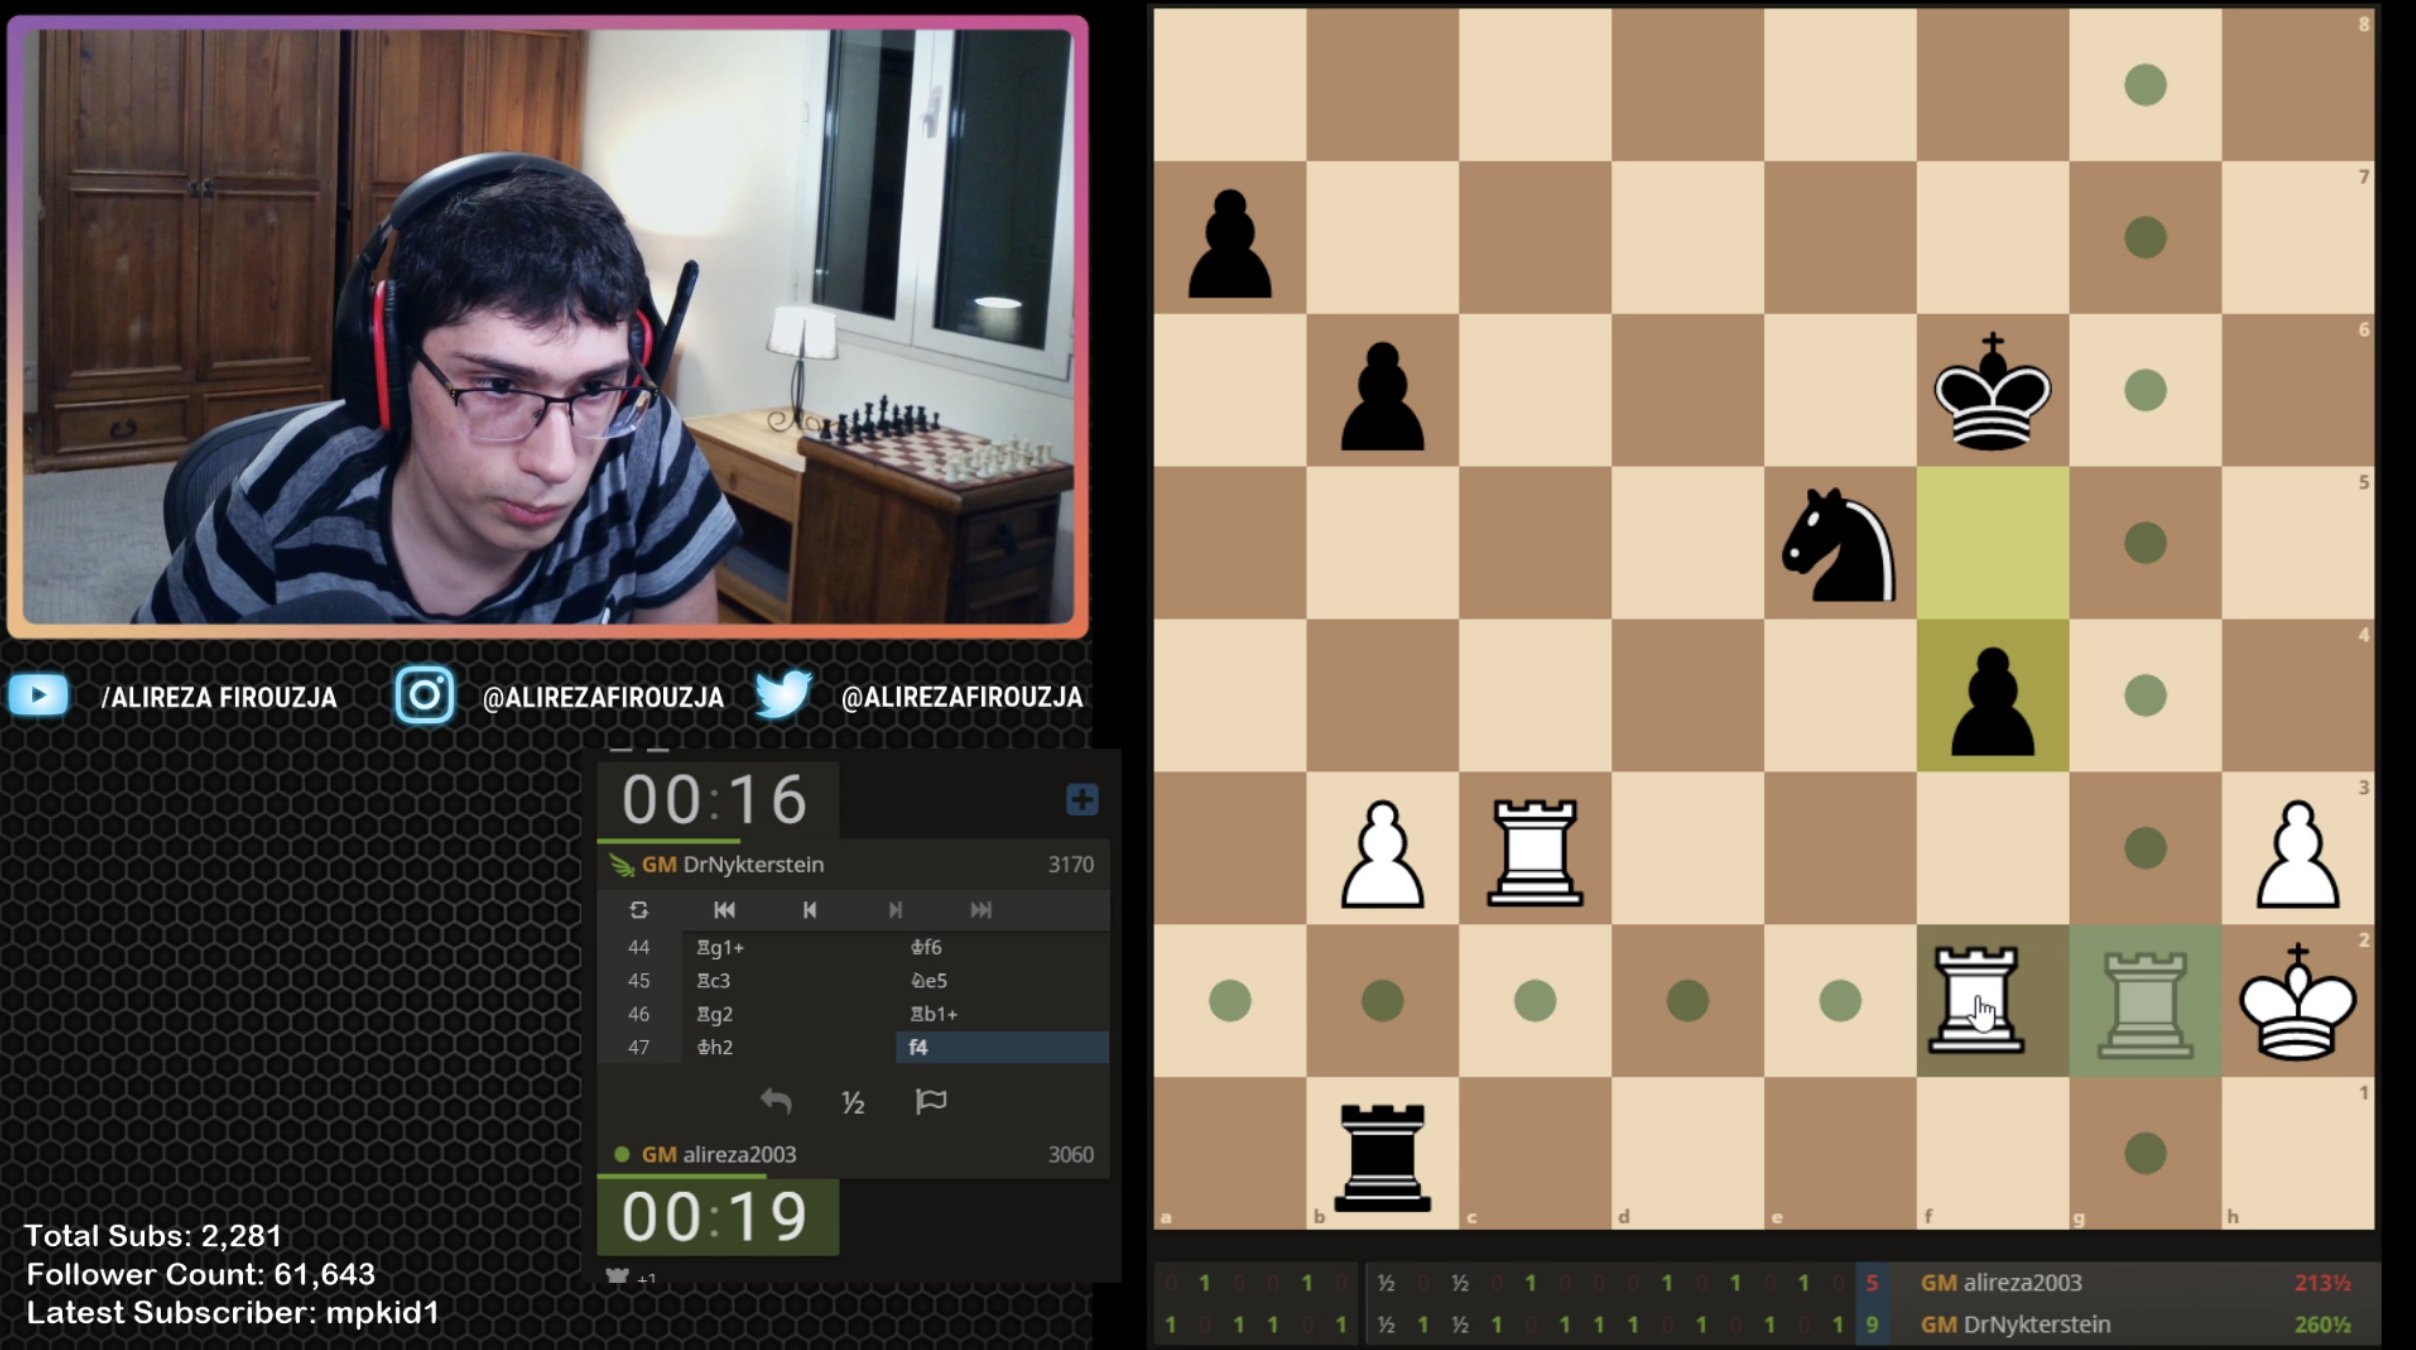 lichess.org on X: Right now, Magnus Carlsen is playing GM Alireza Firouzja  on Lichess, and Alireza is streaming ➡️    / X